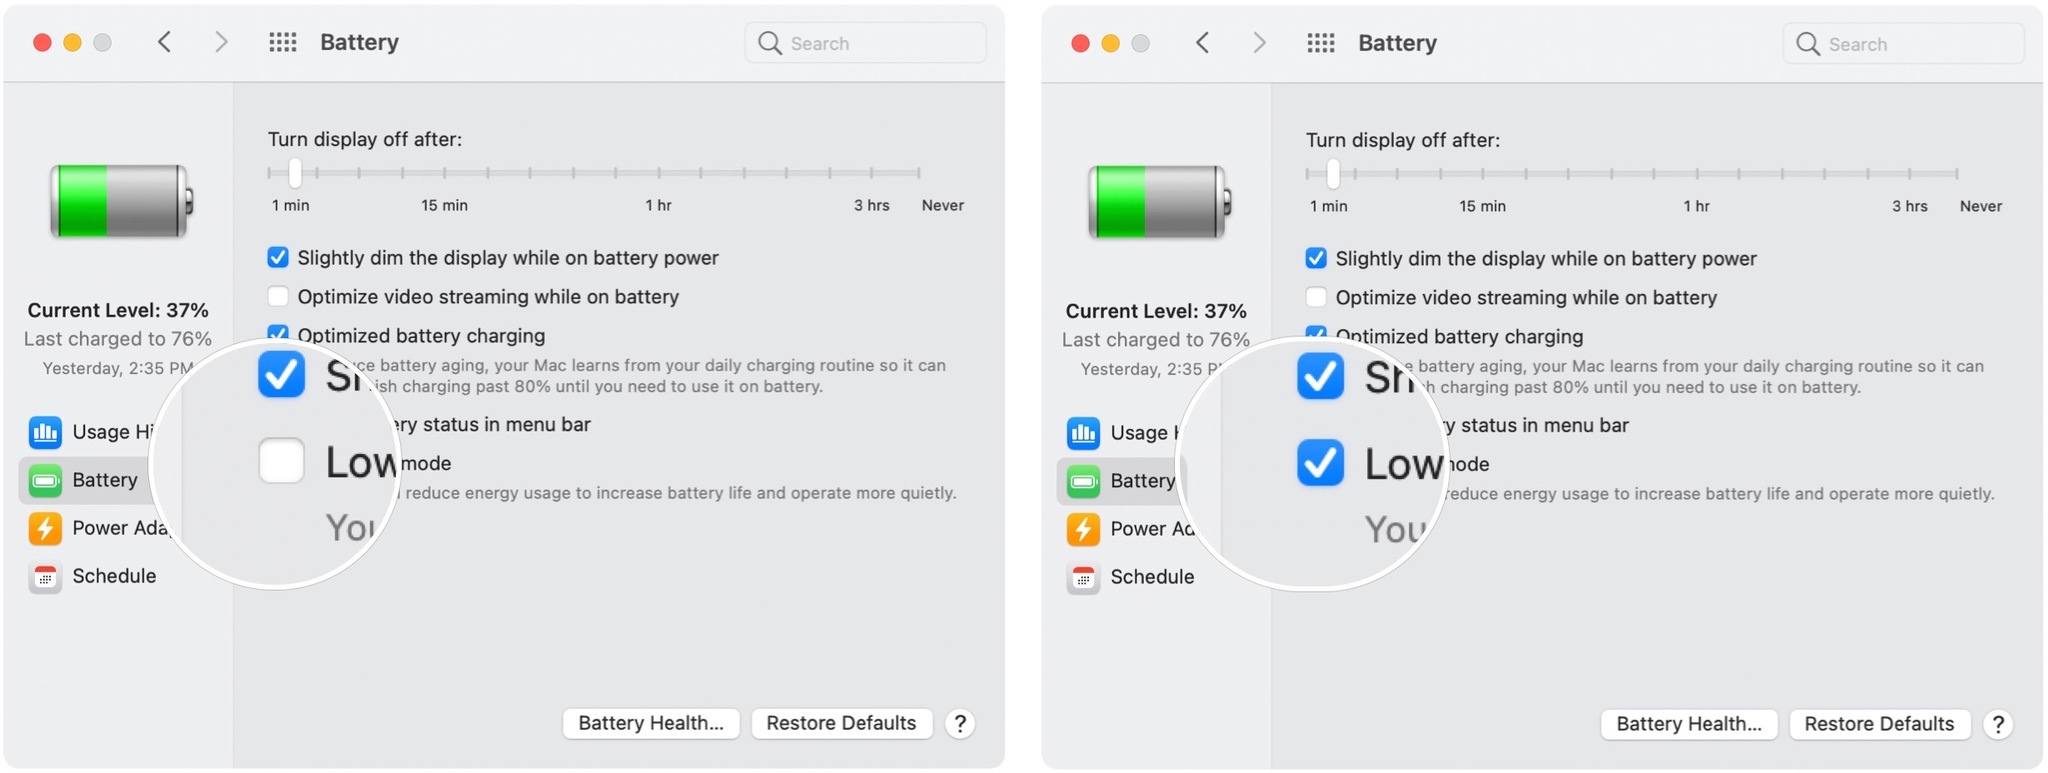 To use Low Power Mode With Battery Power, check the Low power mode box. 